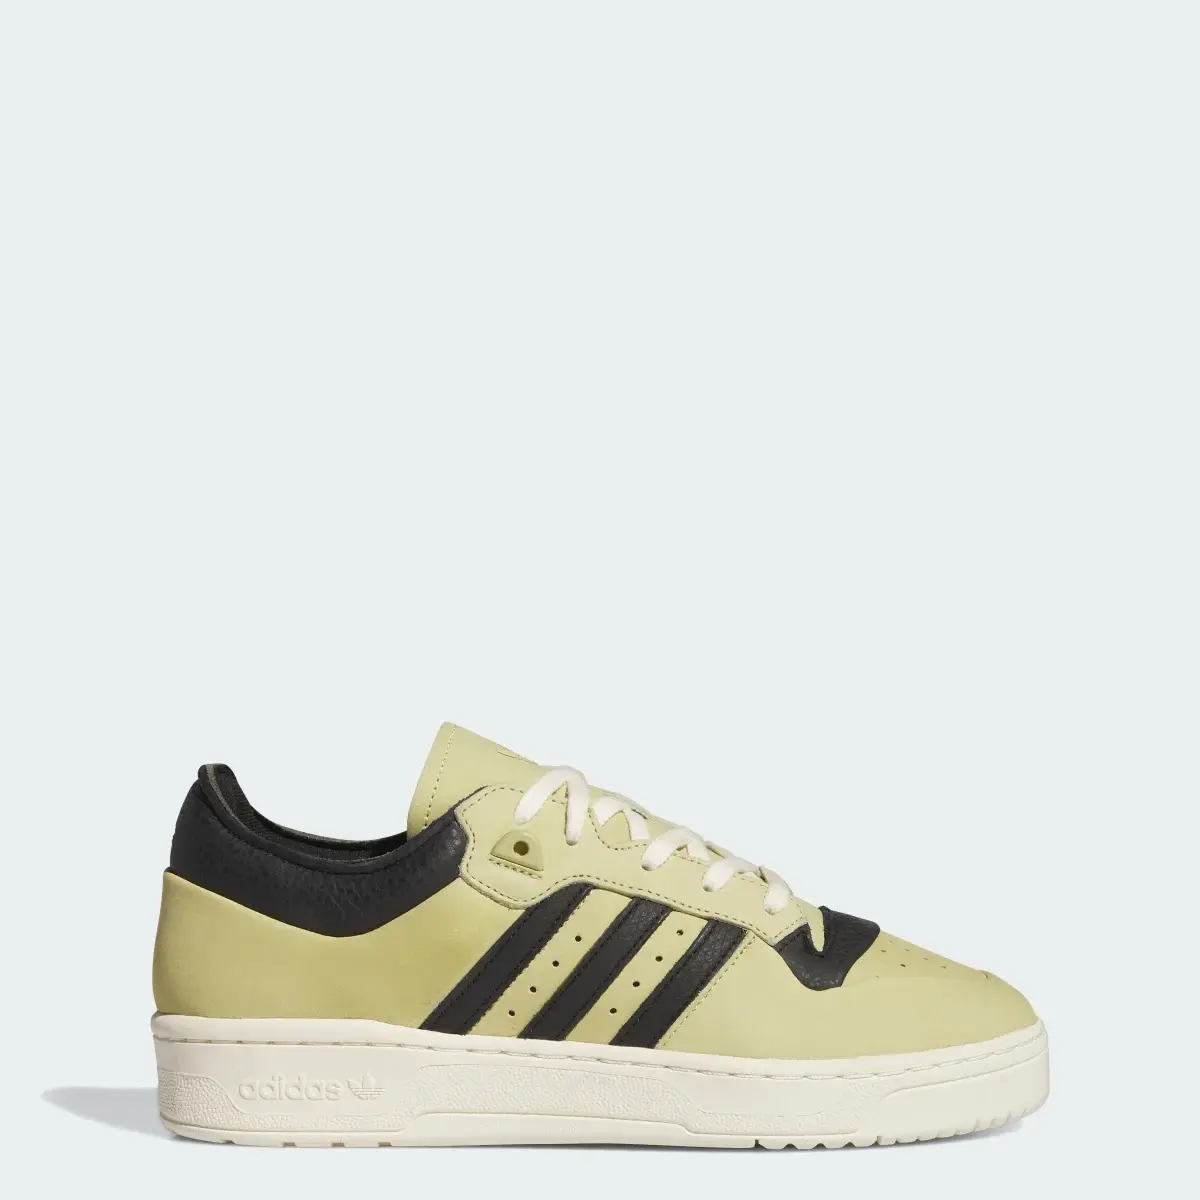 Adidas Sapatilhas Rivalry 86 Low 001. 1